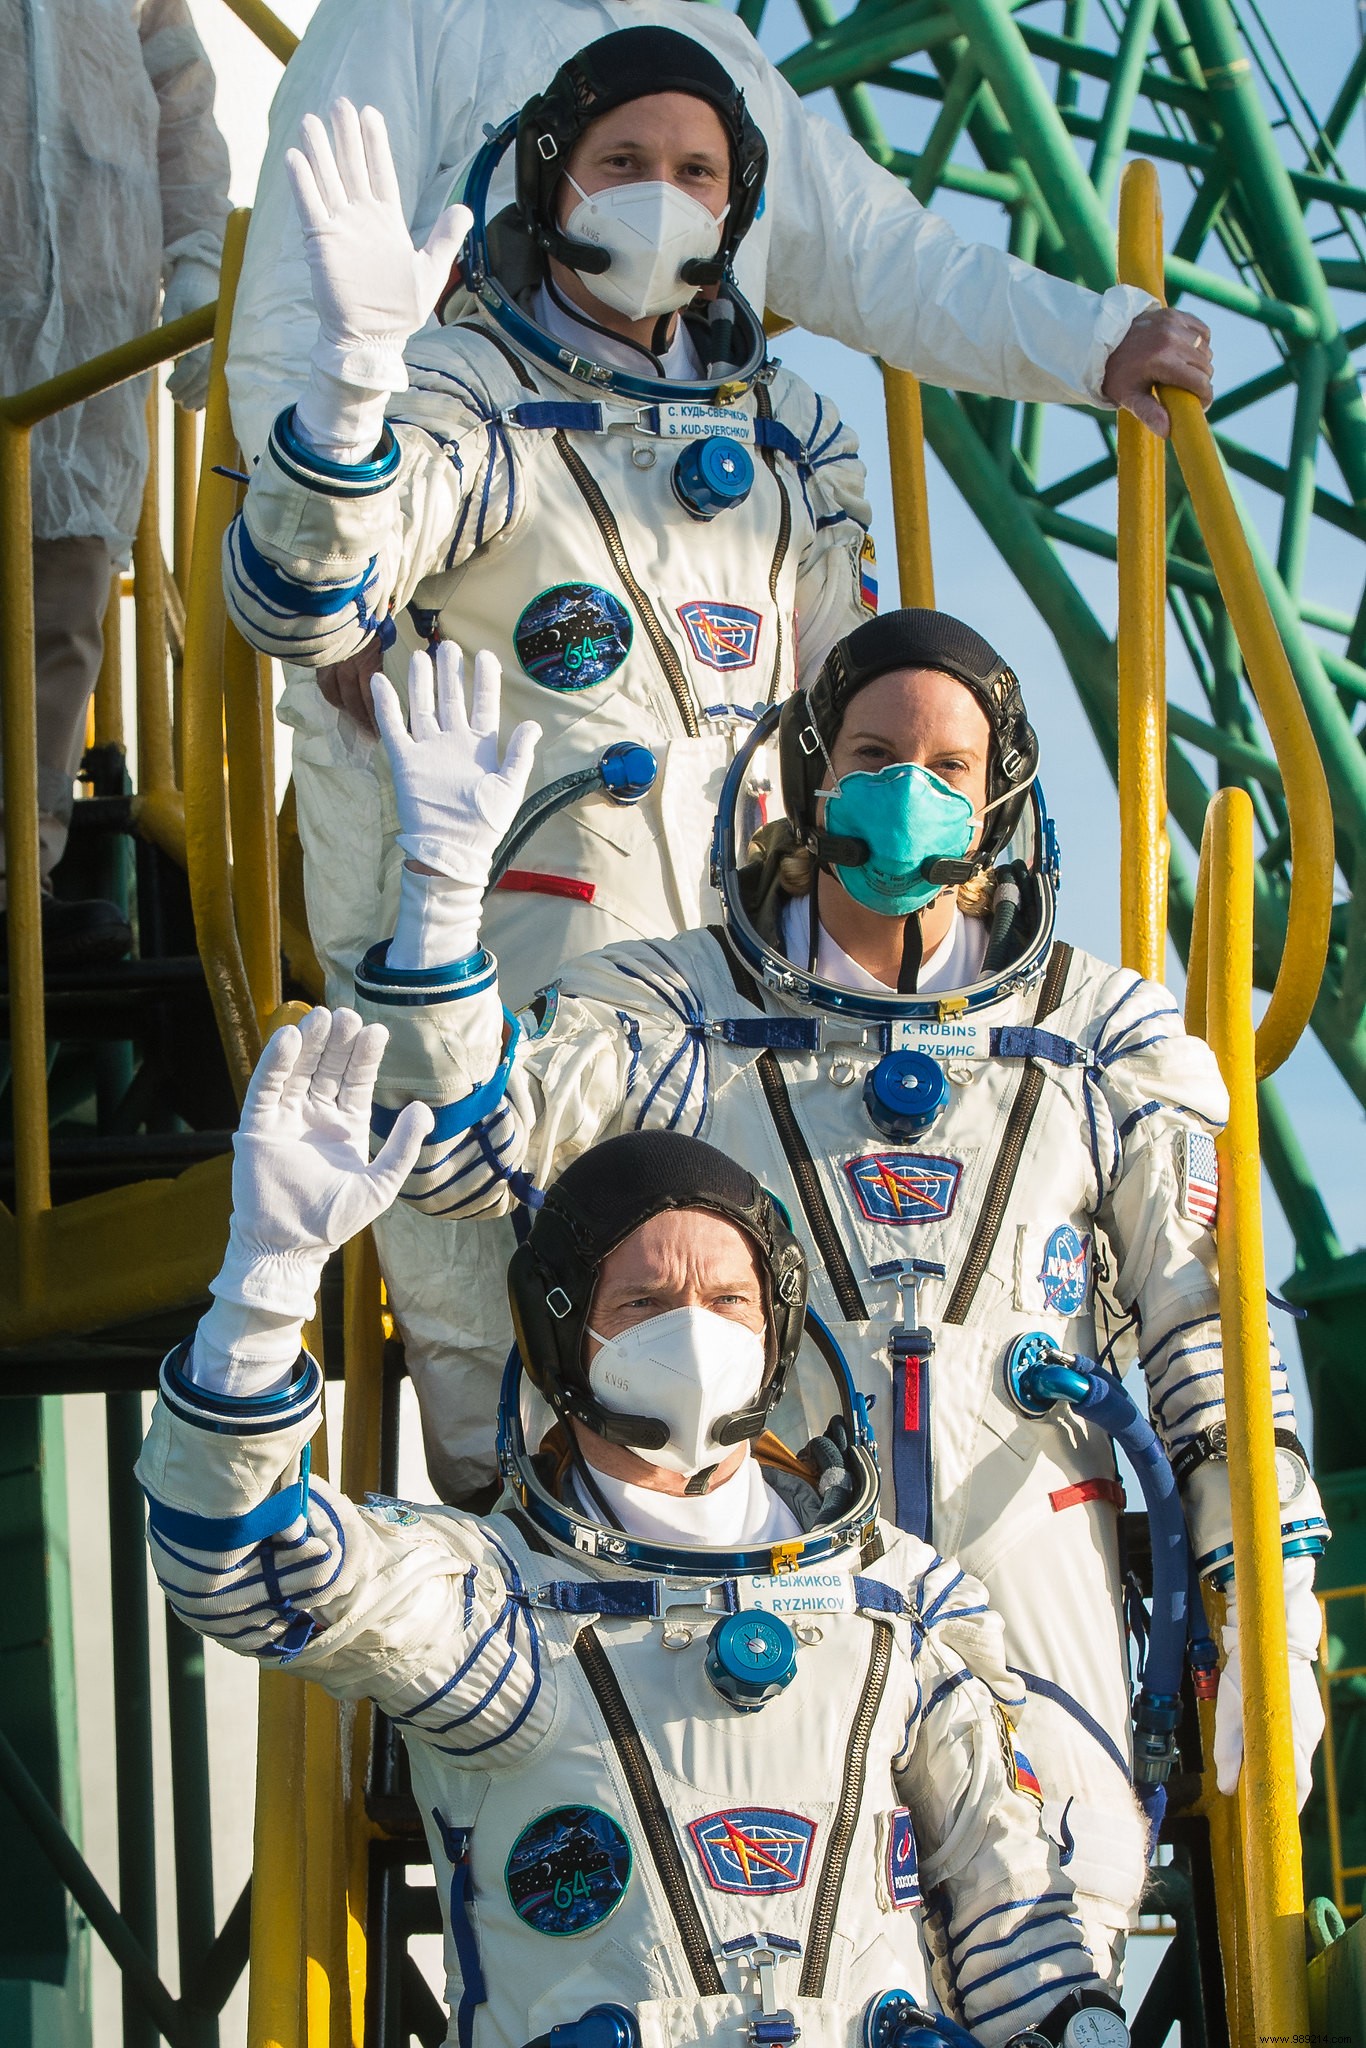 A new crew reaches the ISS in record time 